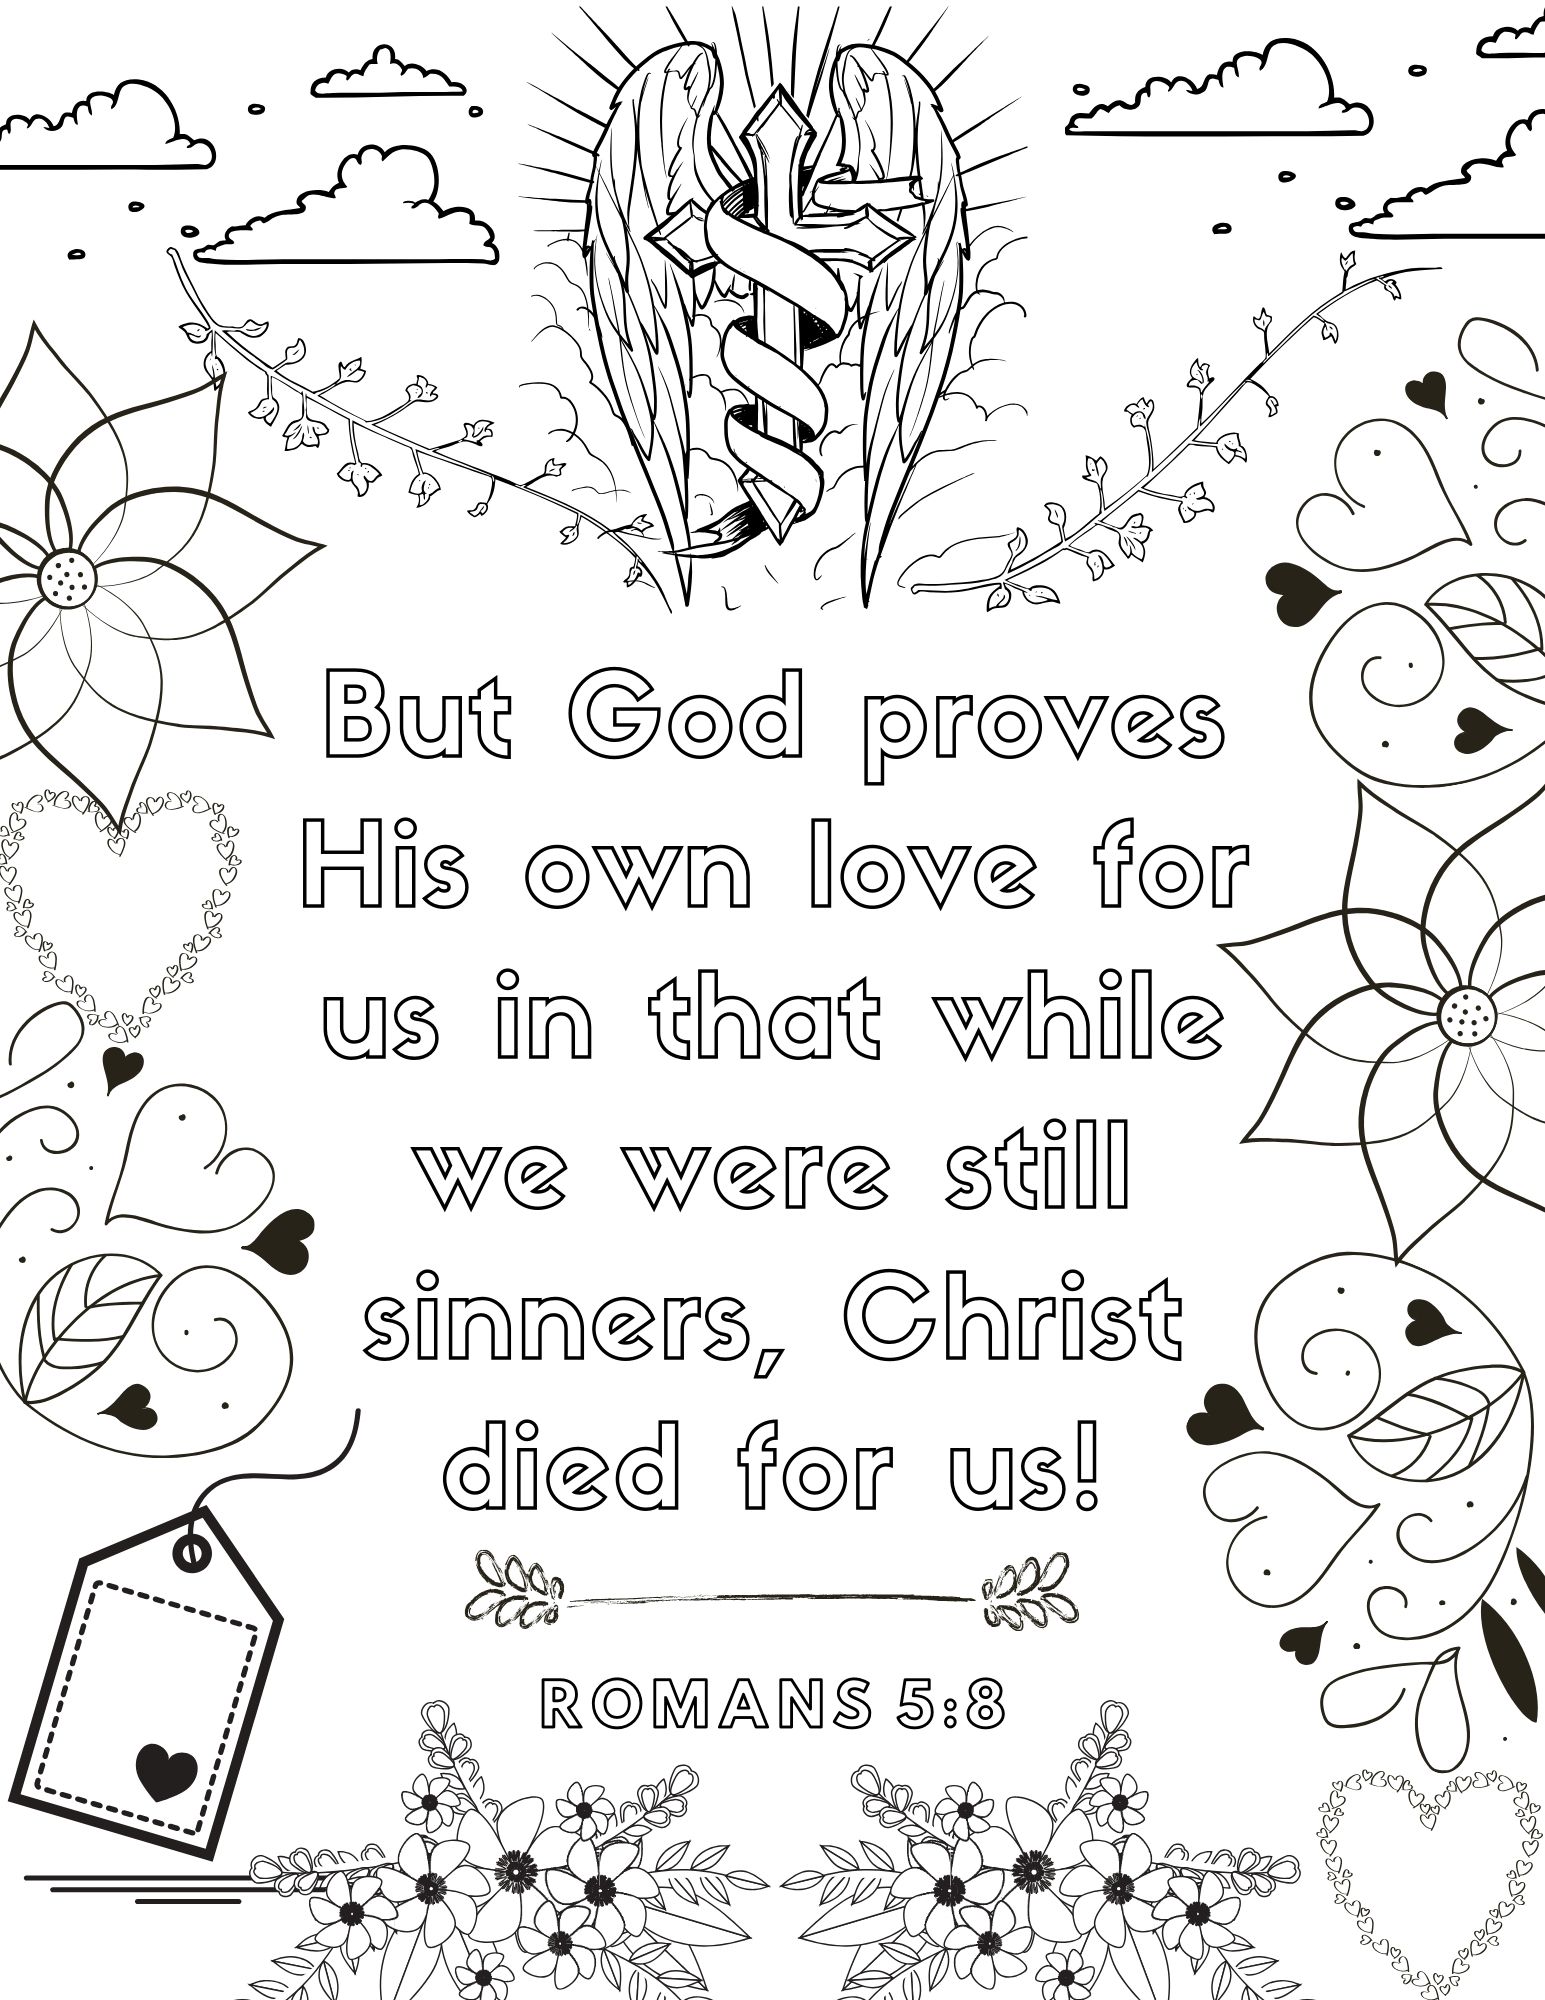 free-bible-coloring-pages-for-adults-pin-by-rebecca-zappe-on-bible